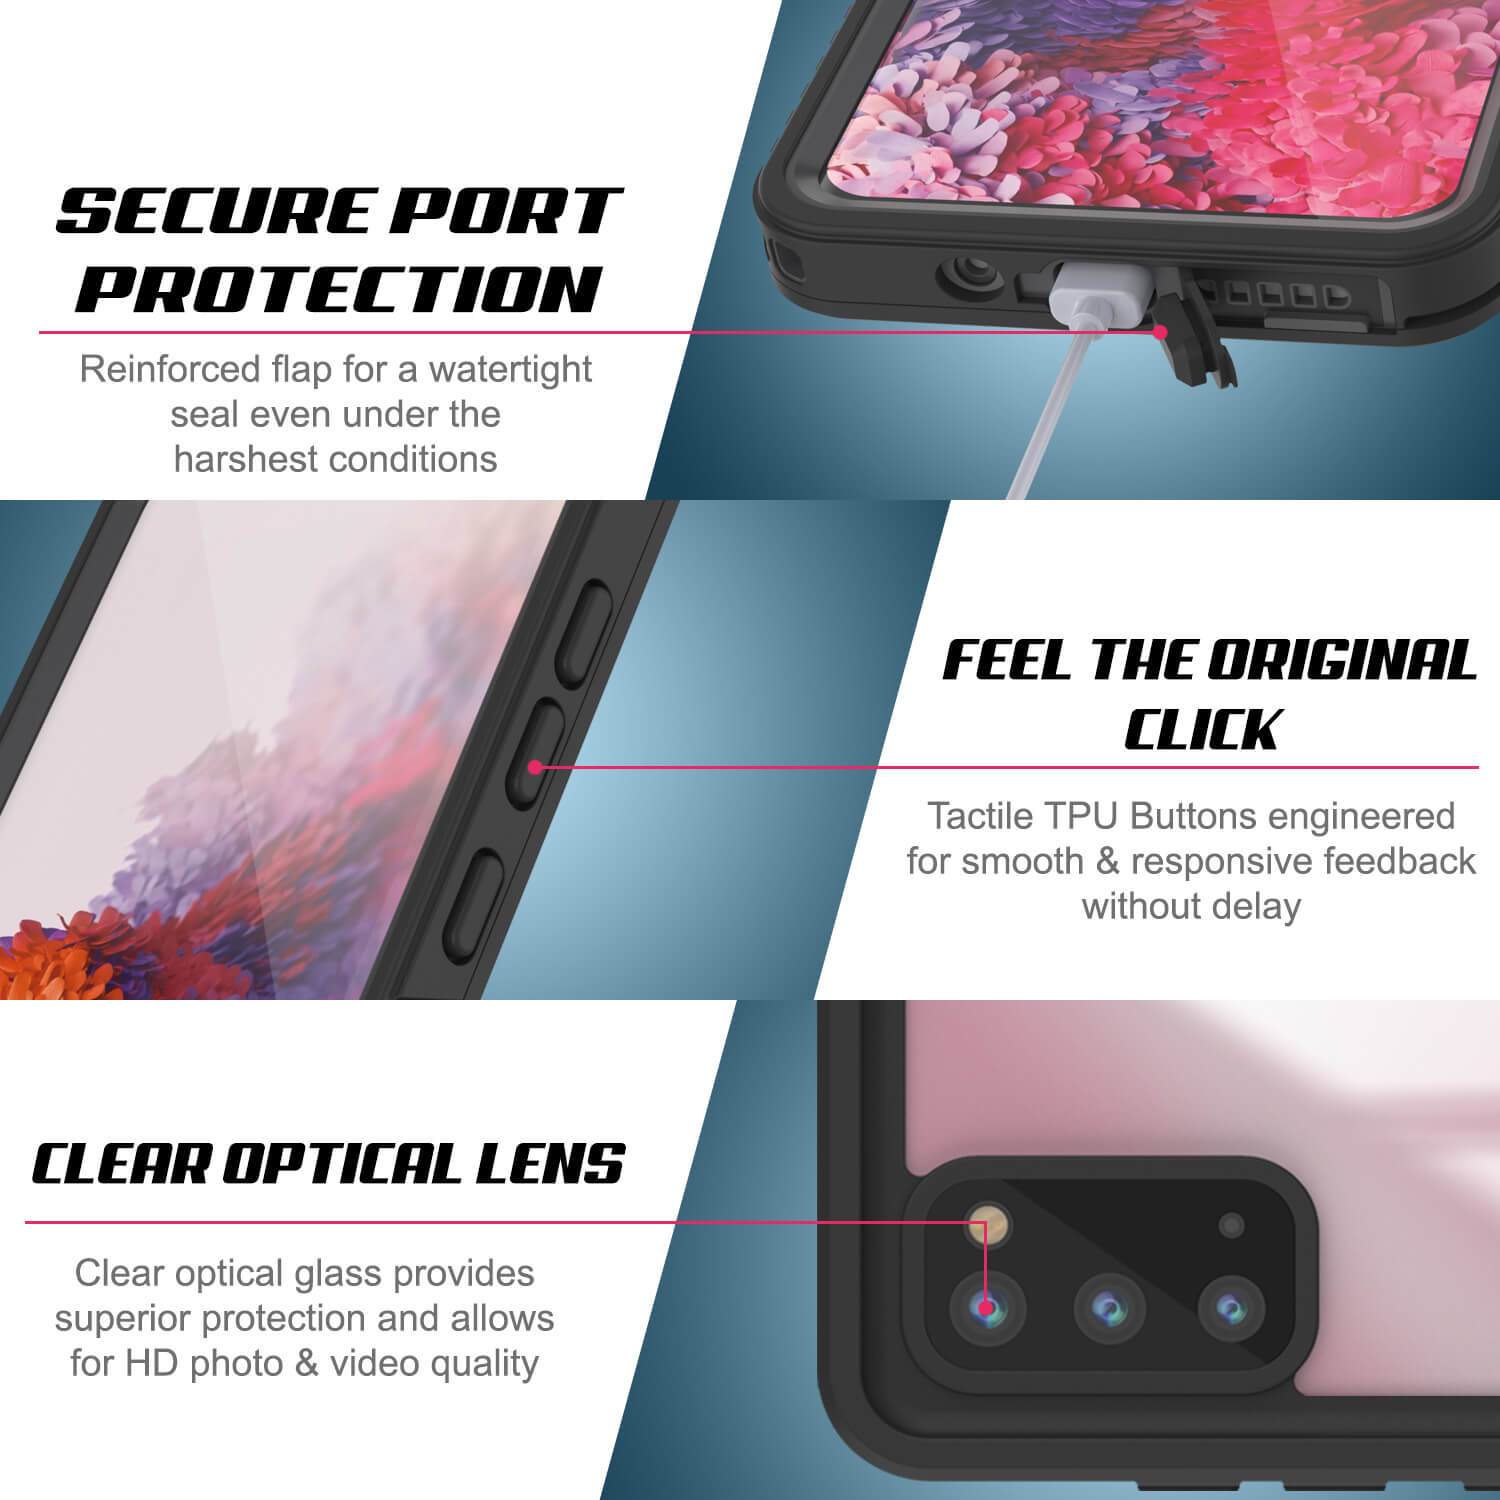 Galaxy S20 Water/Shock/Snowproof [Extreme Series] Slim Screen Protector Case [Pink]